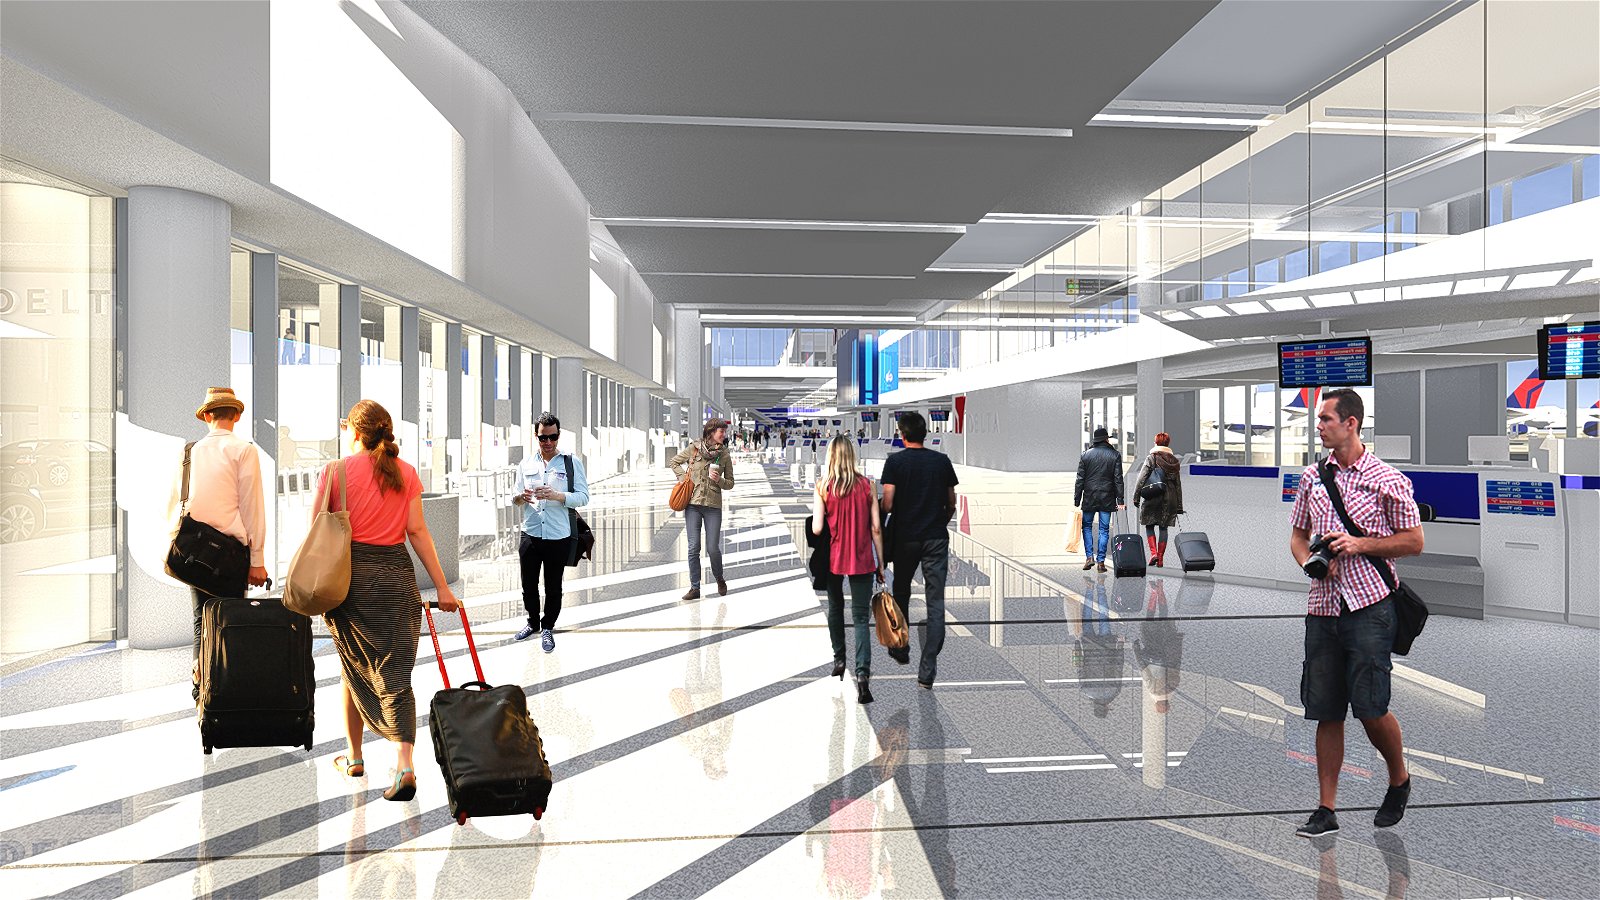 Delta's rendering of the "head house" area of Terminals 2 and 3, to be complete by 2021